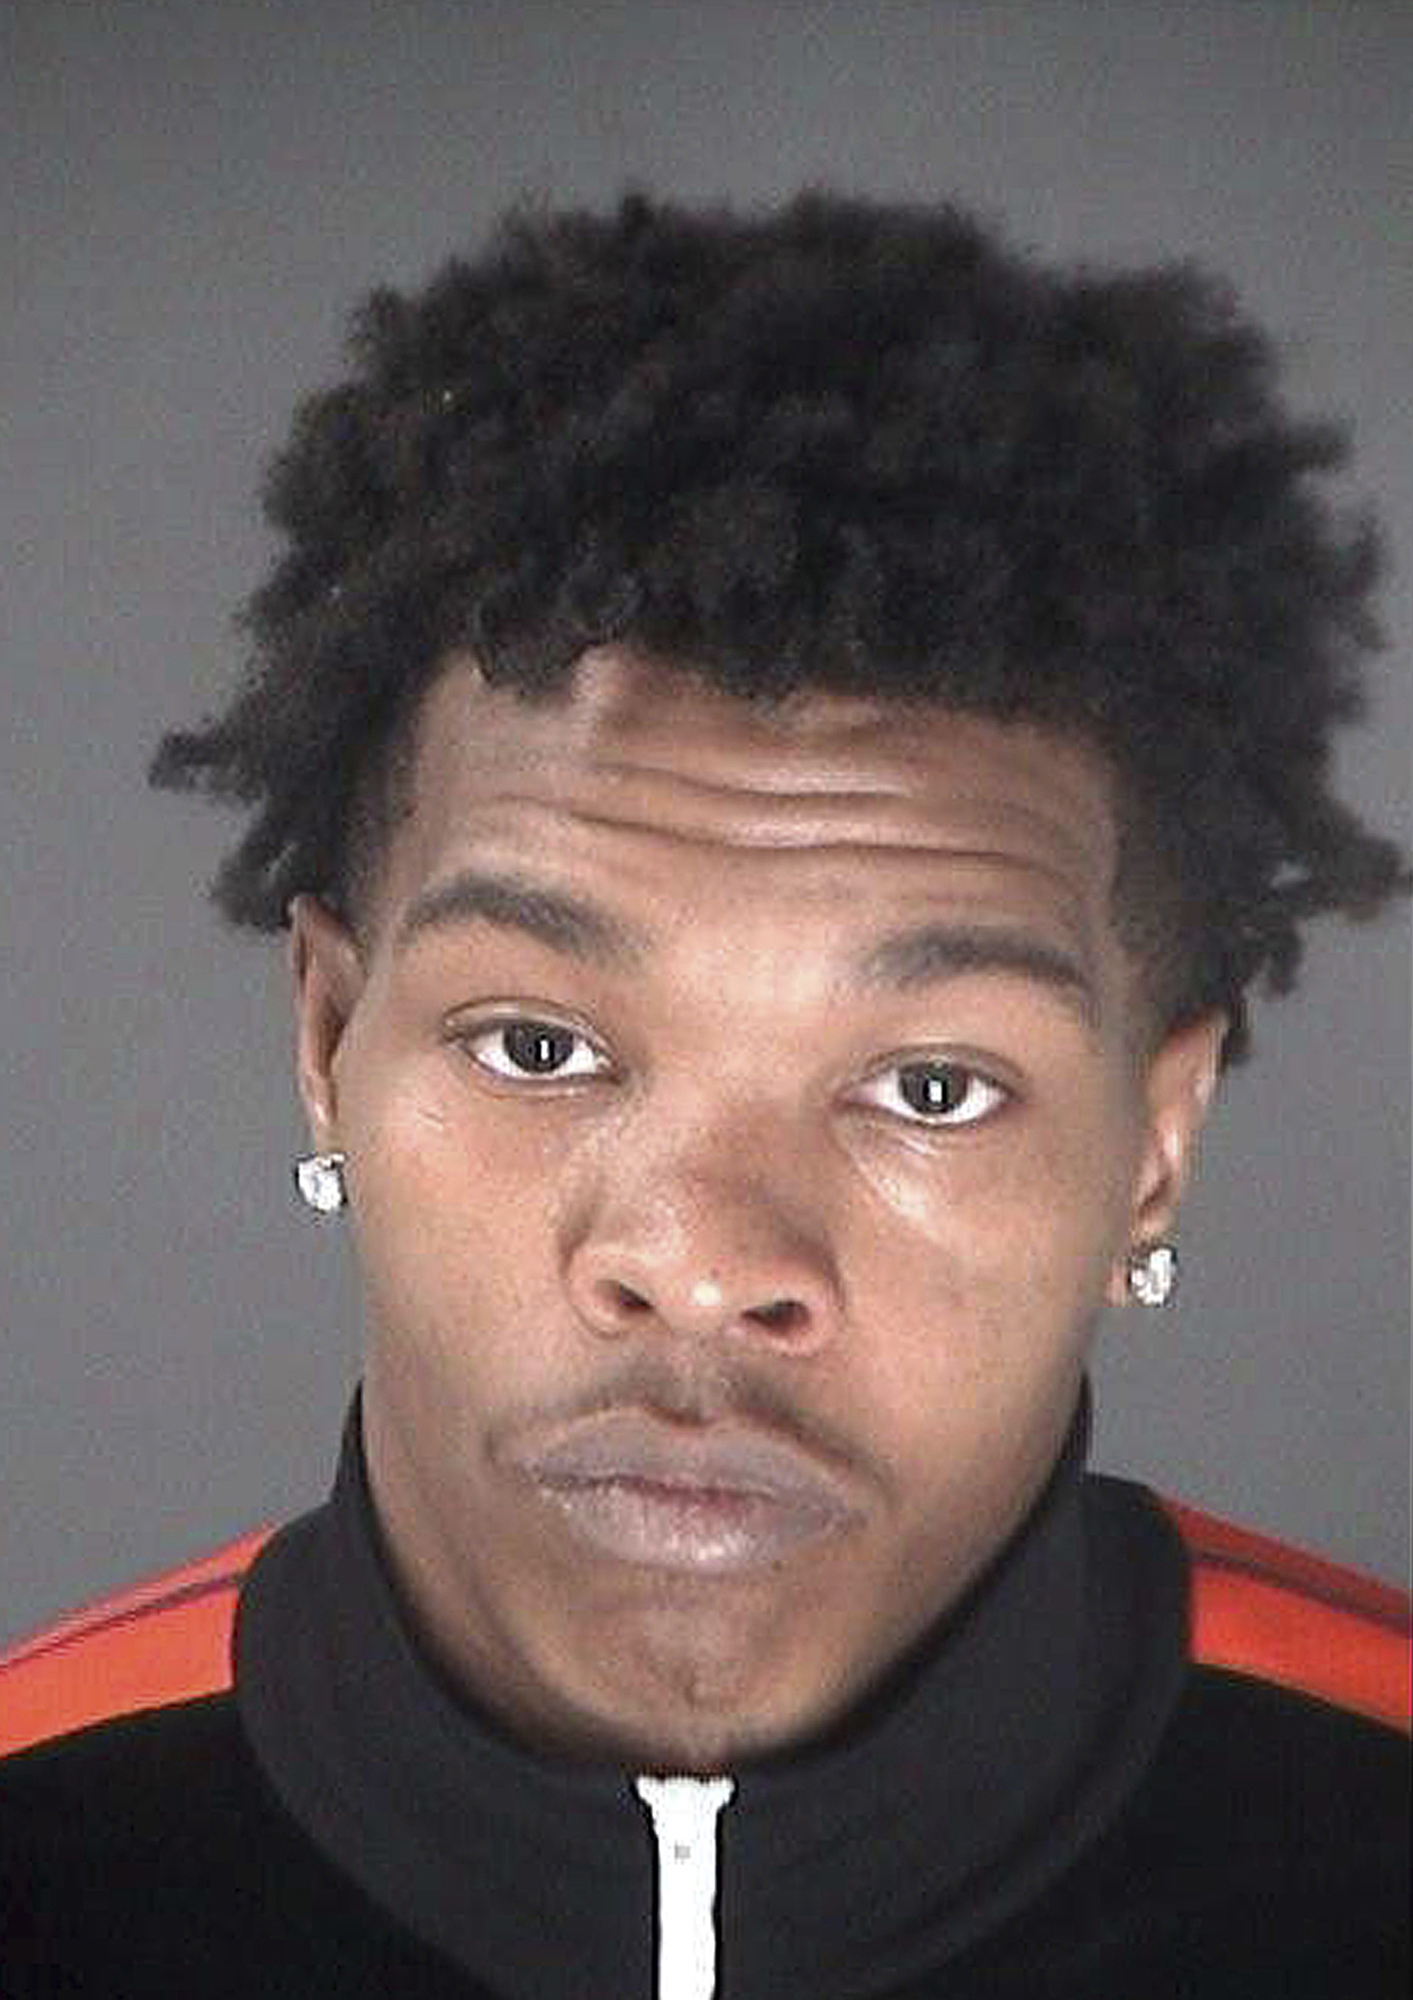 Rapper Lil Baby was arrested in Atlanta after he recklessly passed other ca...